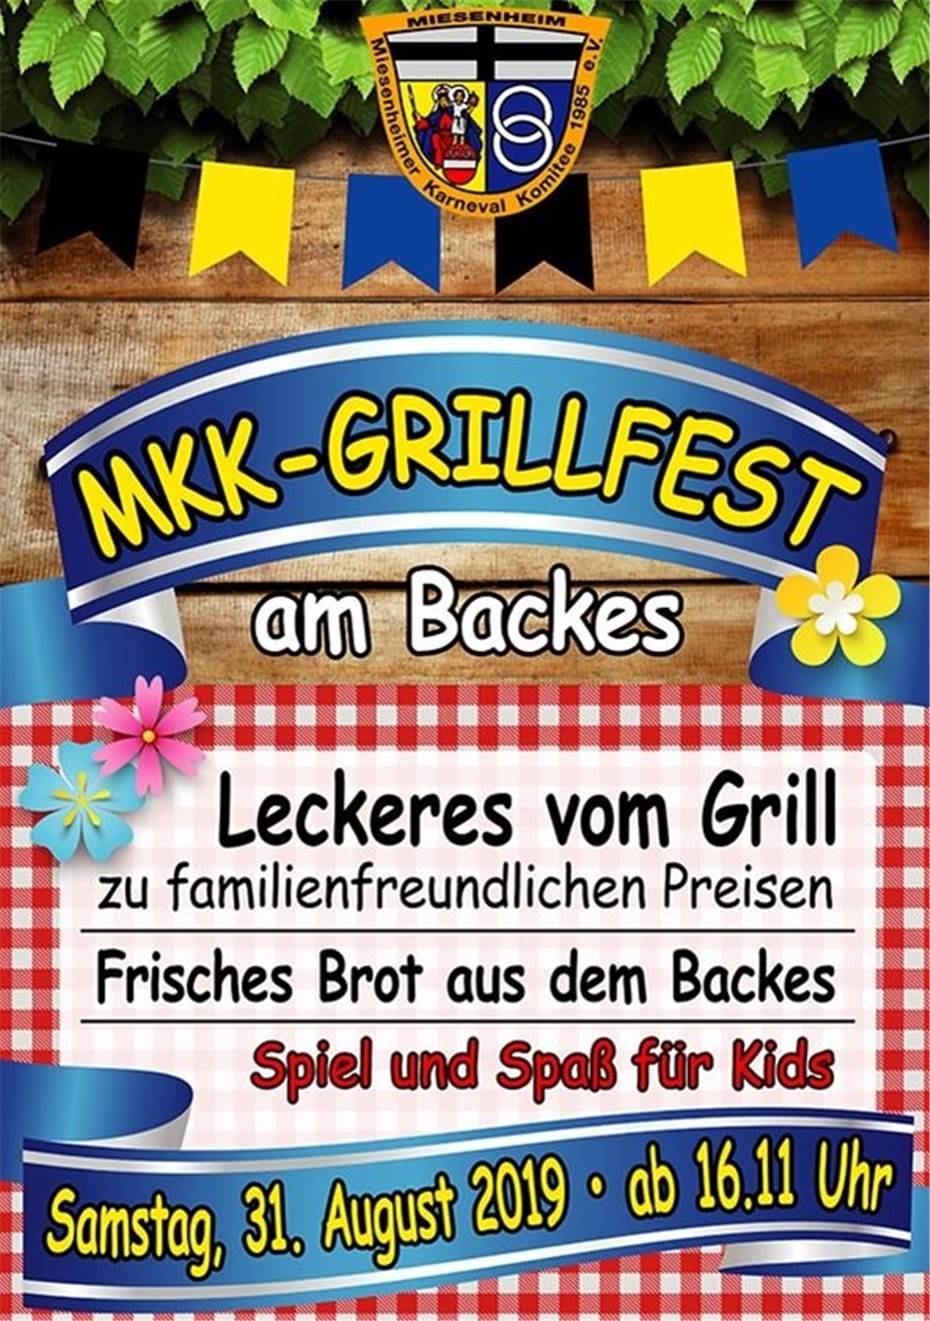 Grillfest am Backes